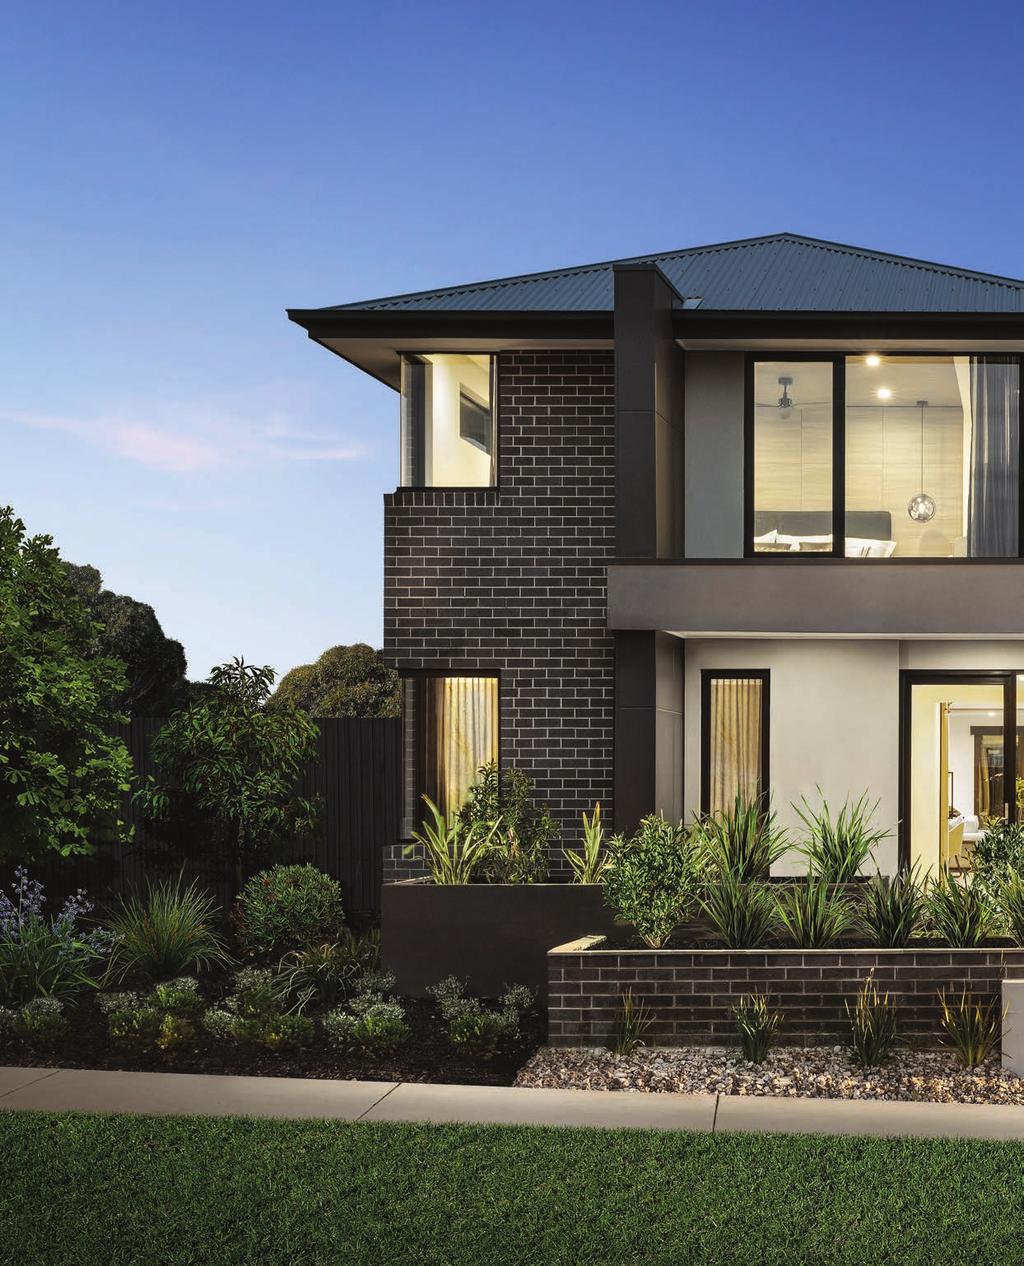 Rendered Projection Feature Front Door Facade Upgrade Render, Tiles, Cladding, Eaves? Upgrade materials or choose a completely new Facade! Up to $5,000 * to spend upgrading your Facade.